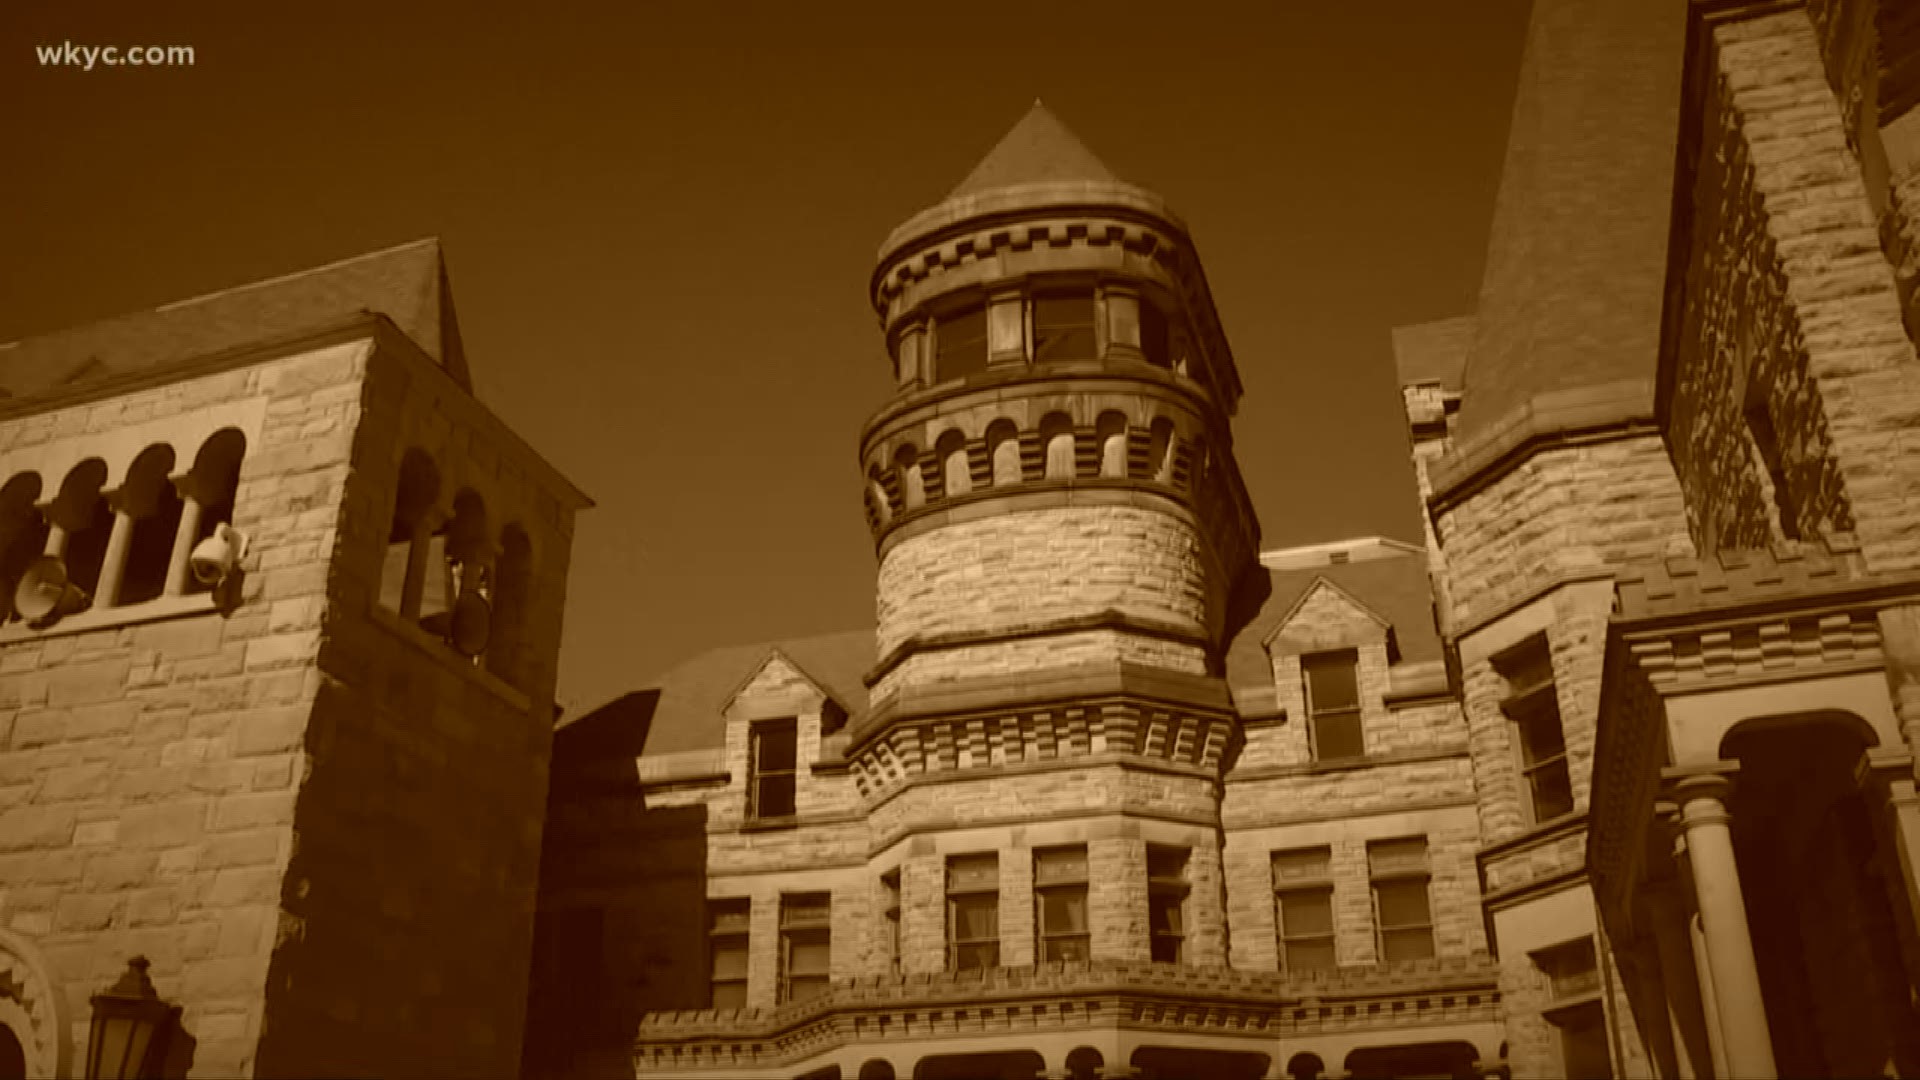 Do you believe in ghosts? Here are a few locations in Northeast Ohio that have been ranked among the most haunted by author Sherri Brake, who also owns Haunted Heartland Tours.